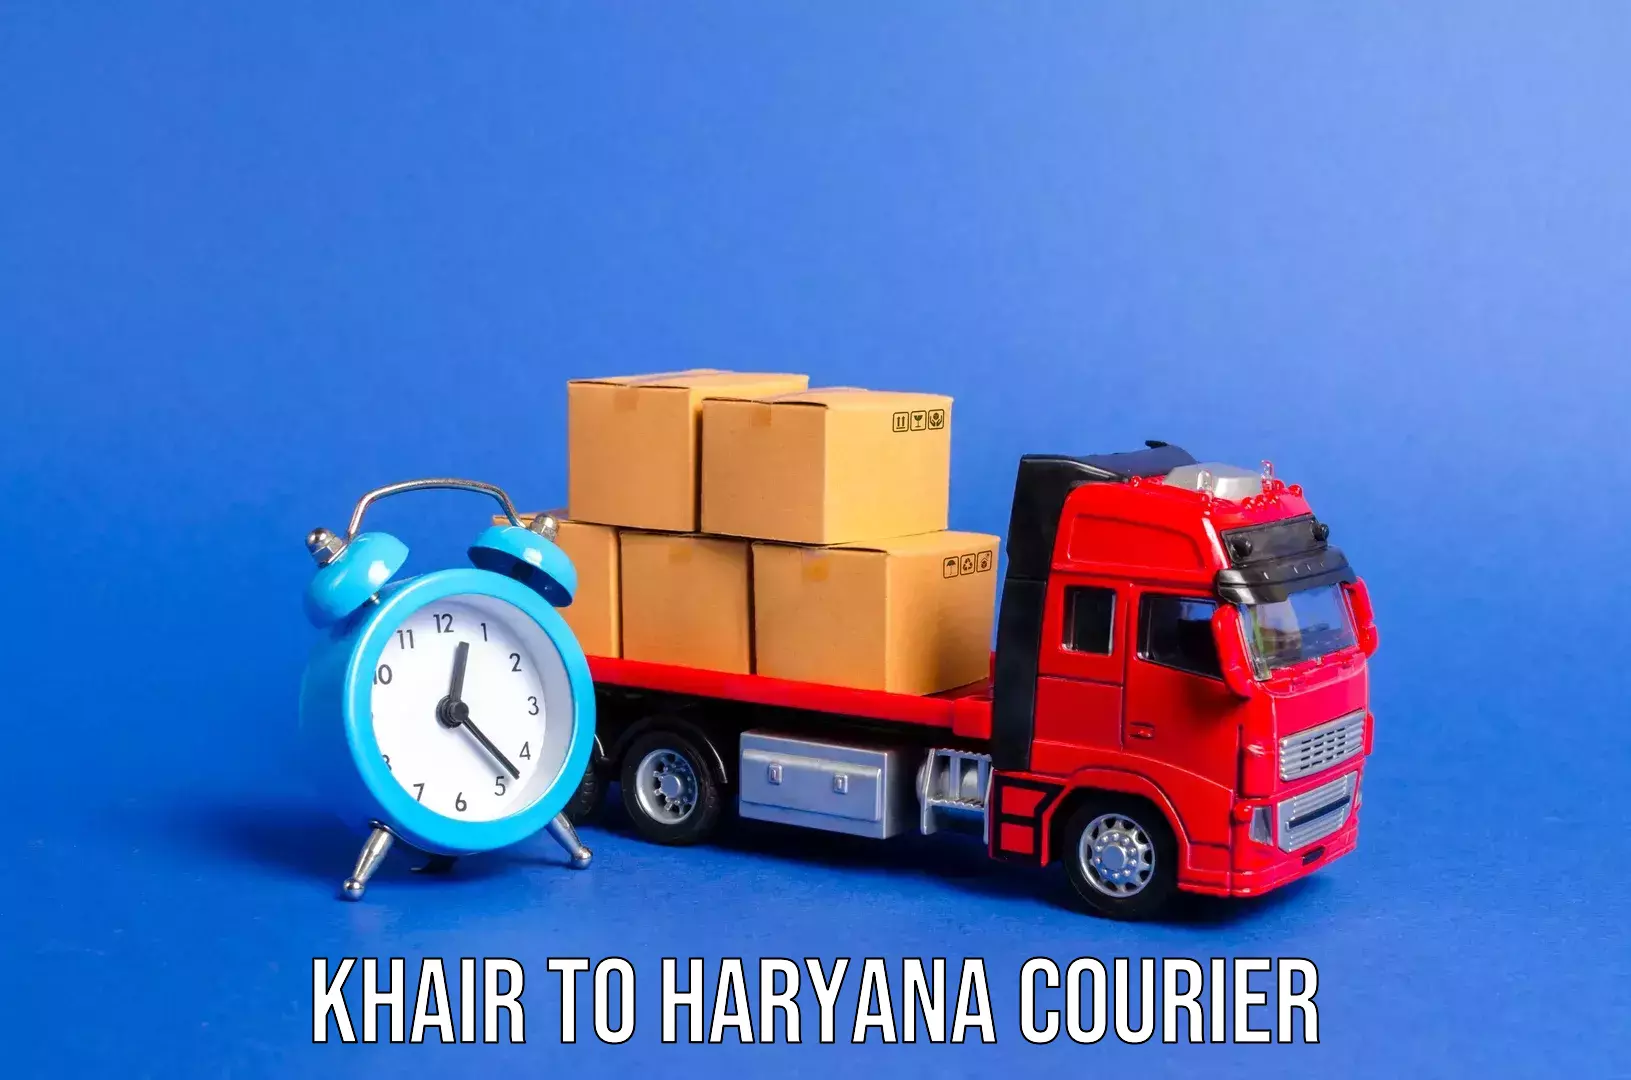 Luggage shipping specialists Khair to Haryana